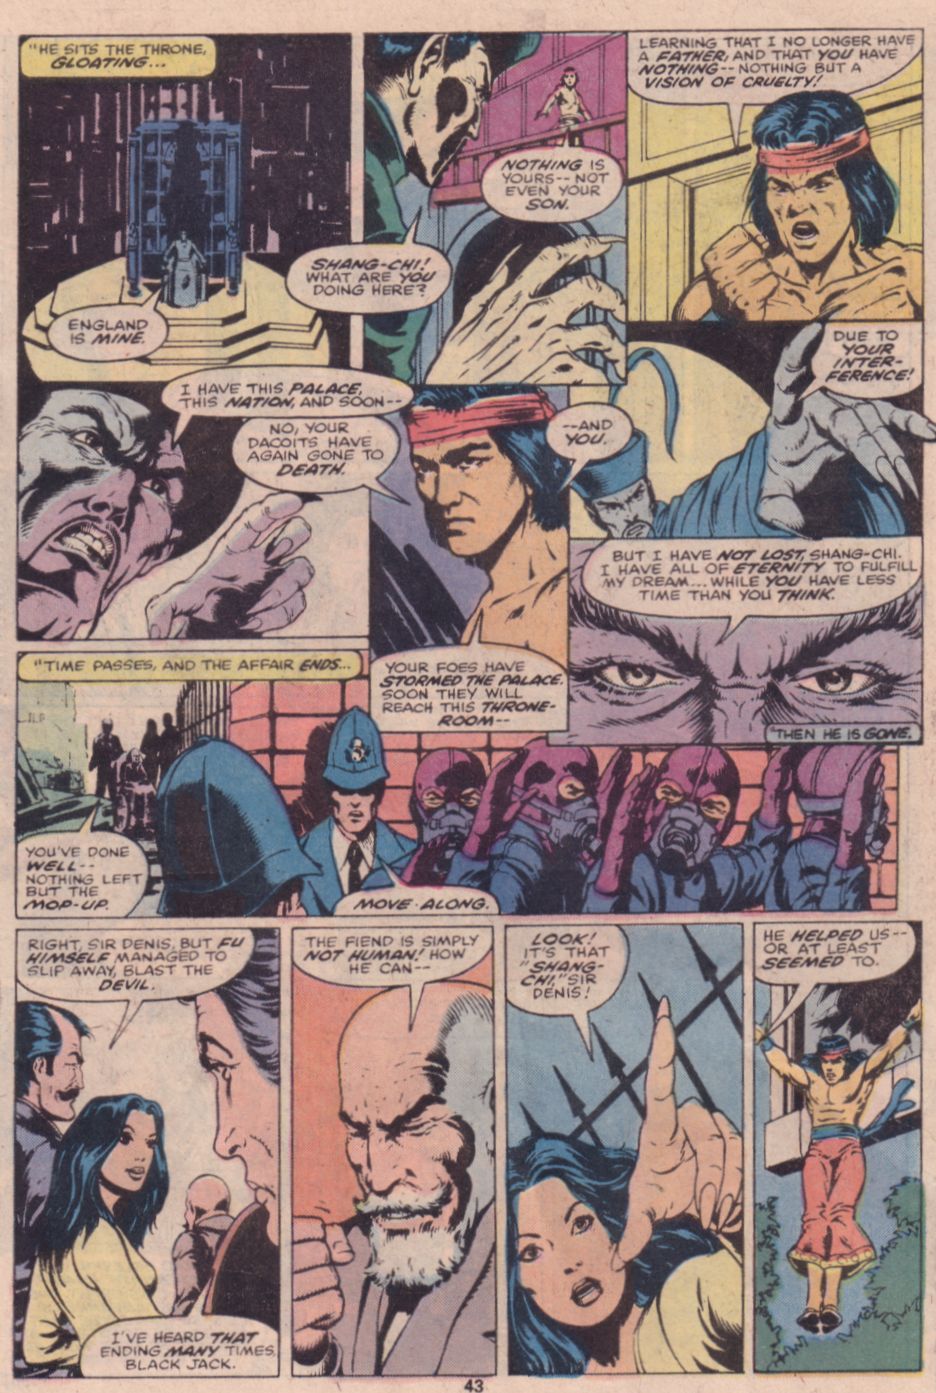 What If? (1977) issue 16 - Shang Chi Master of Kung Fu fought on The side of Fu Manchu - Page 33